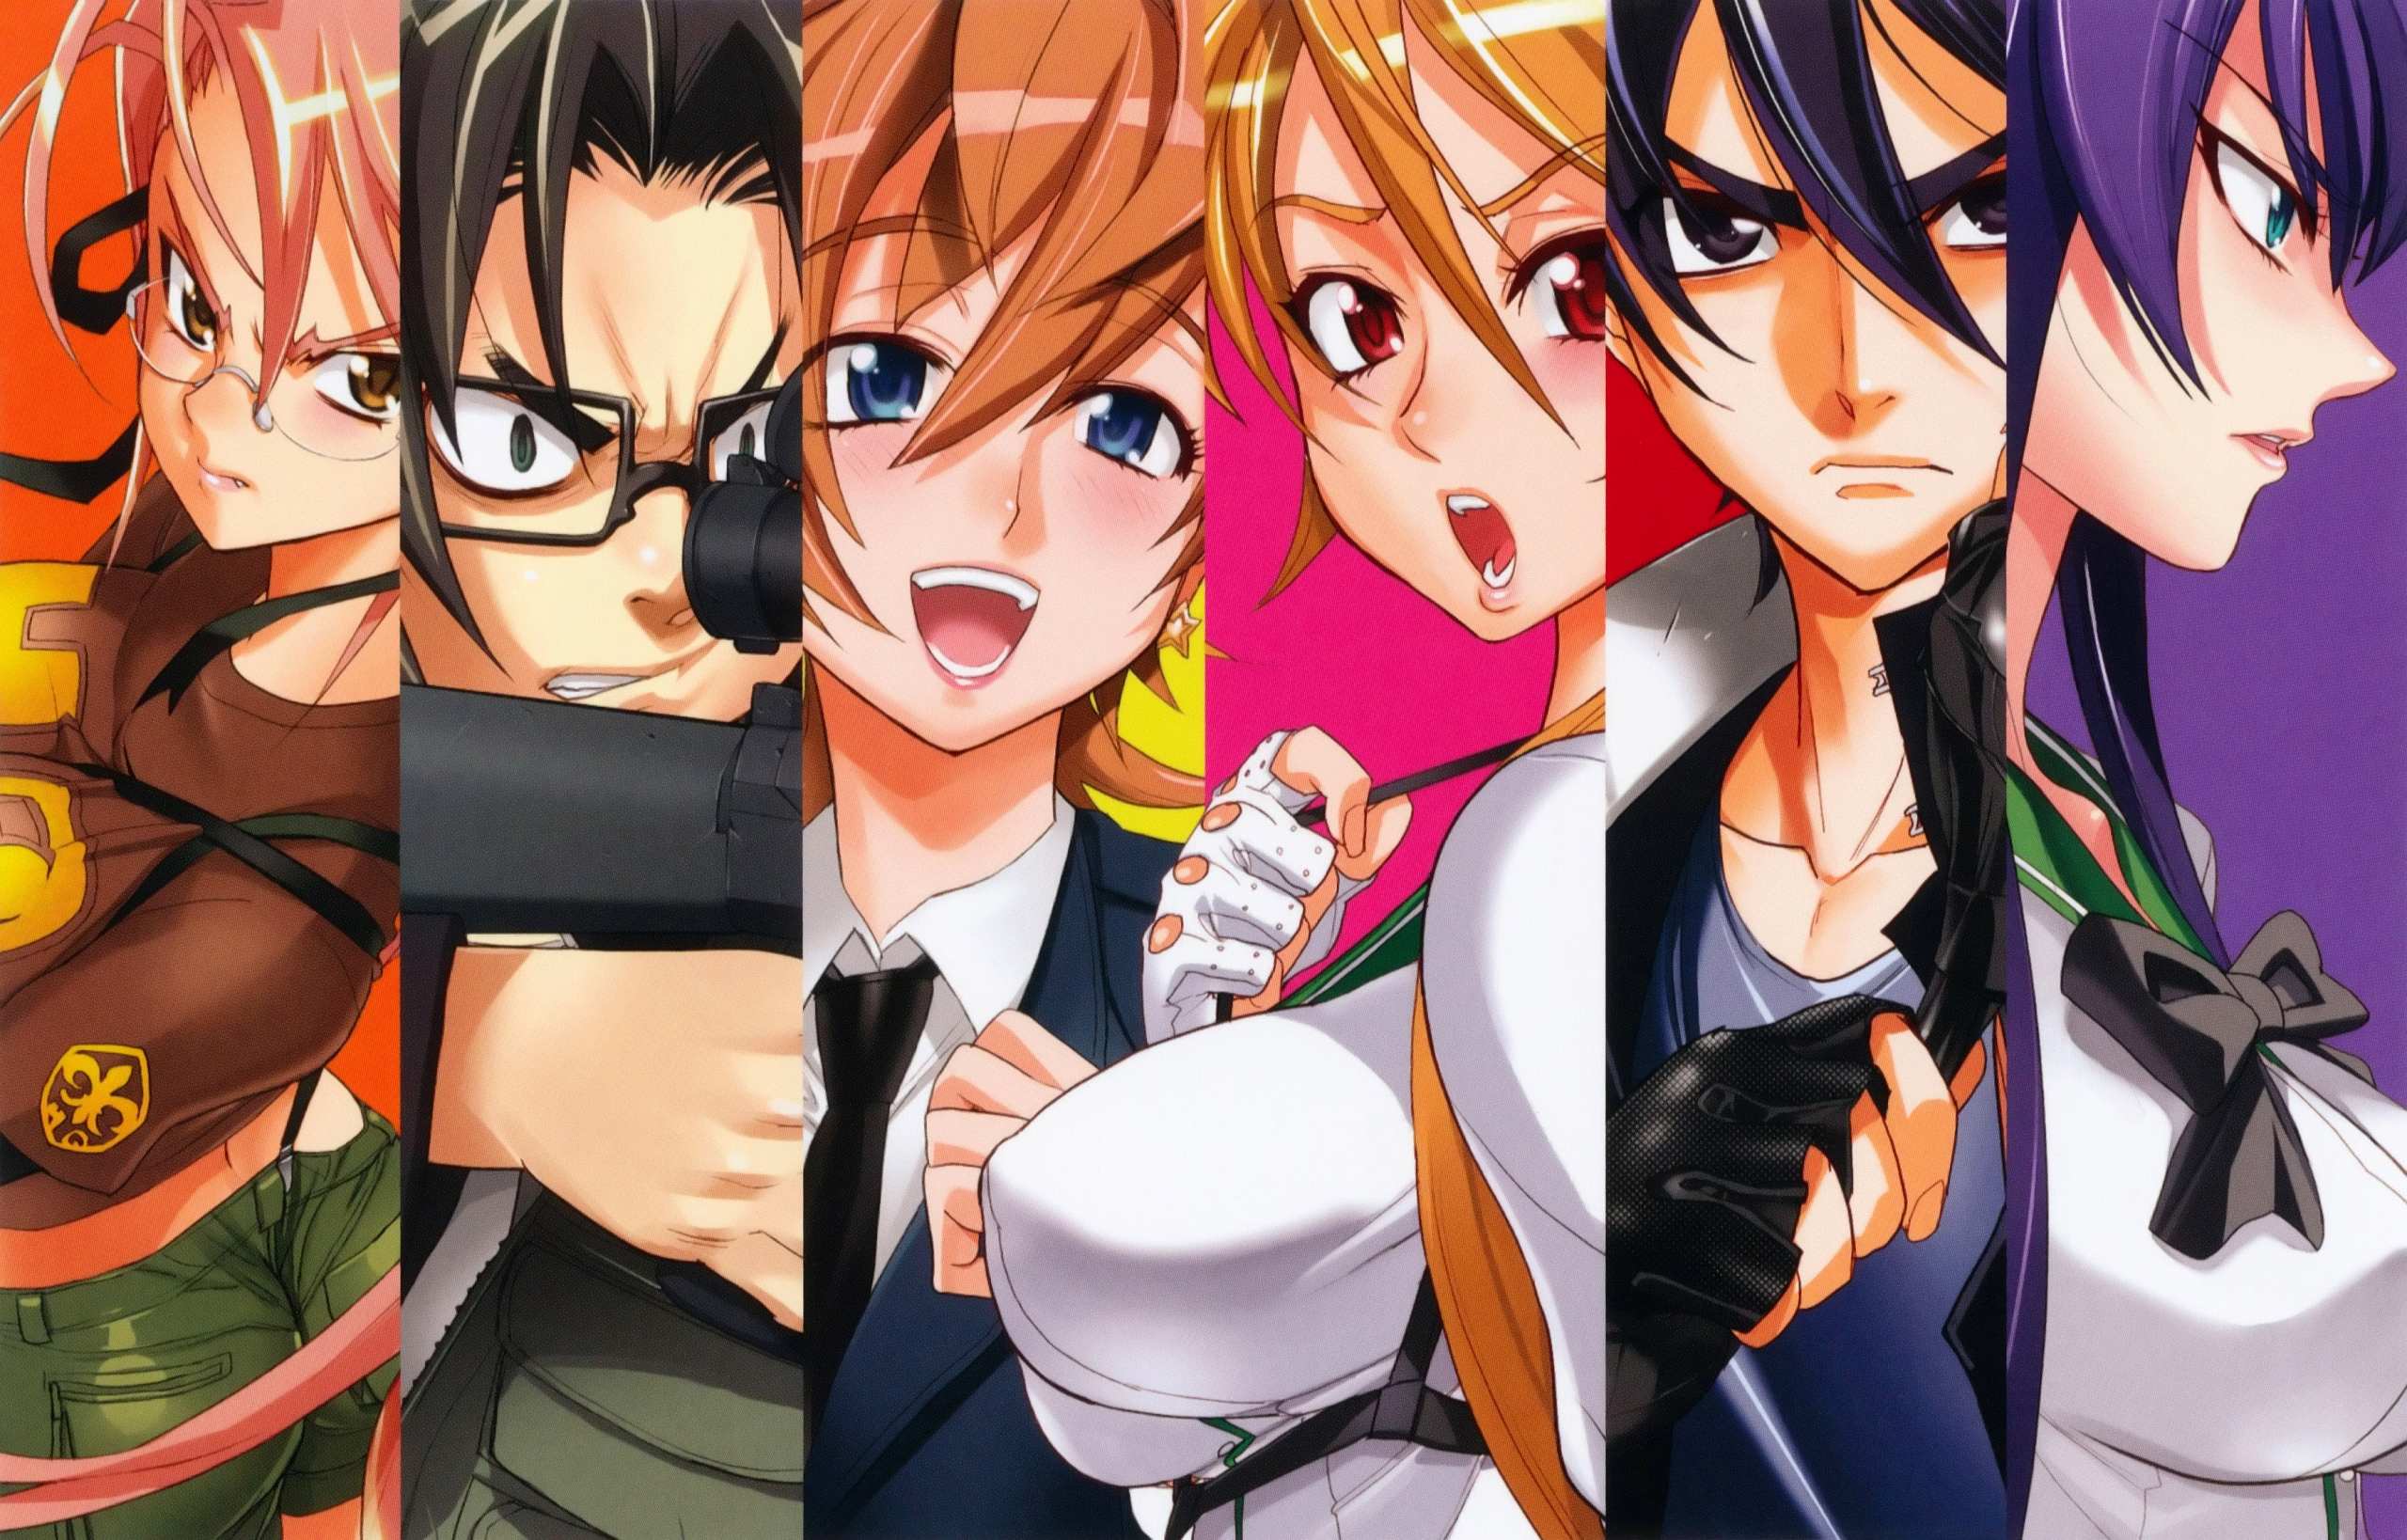 Highschool of the Dead Season 2: Will the Expectations Come to Fruition?